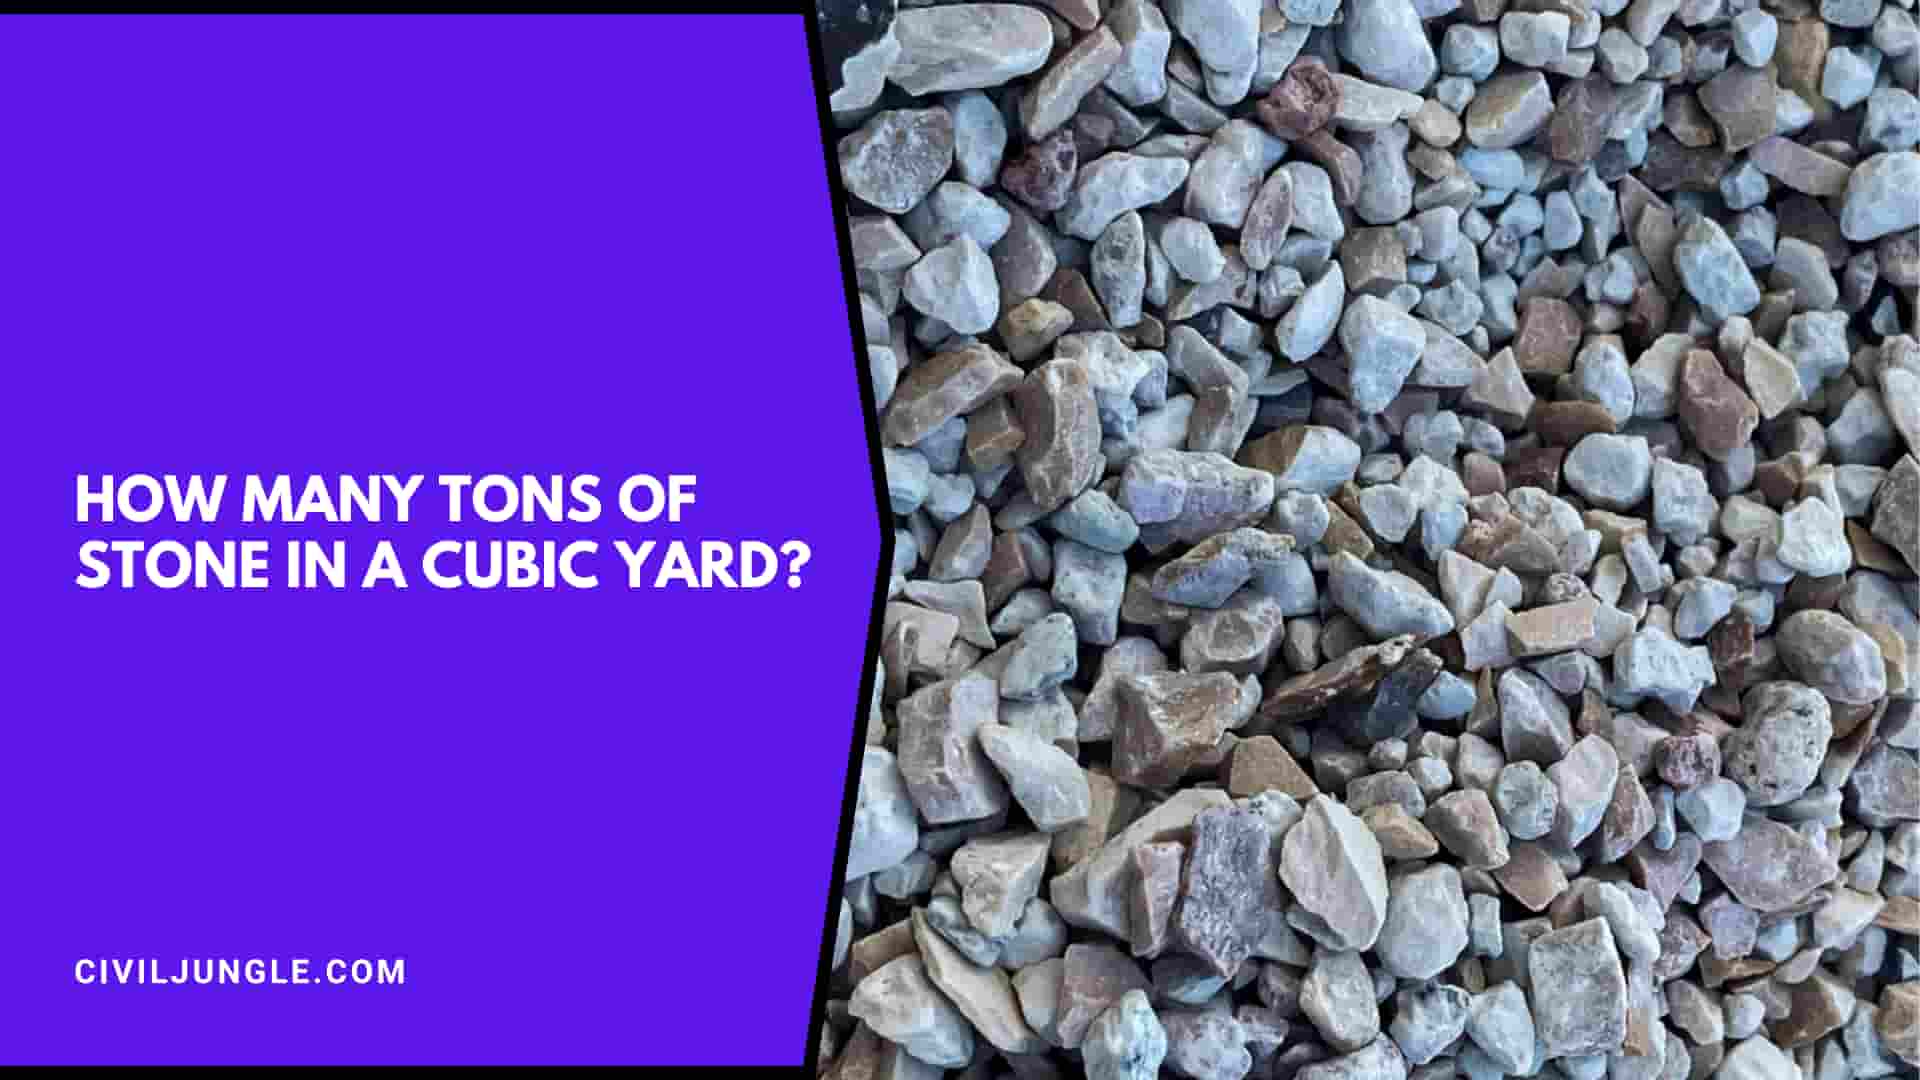 How Many Tons of Stone in a Cubic Yard?